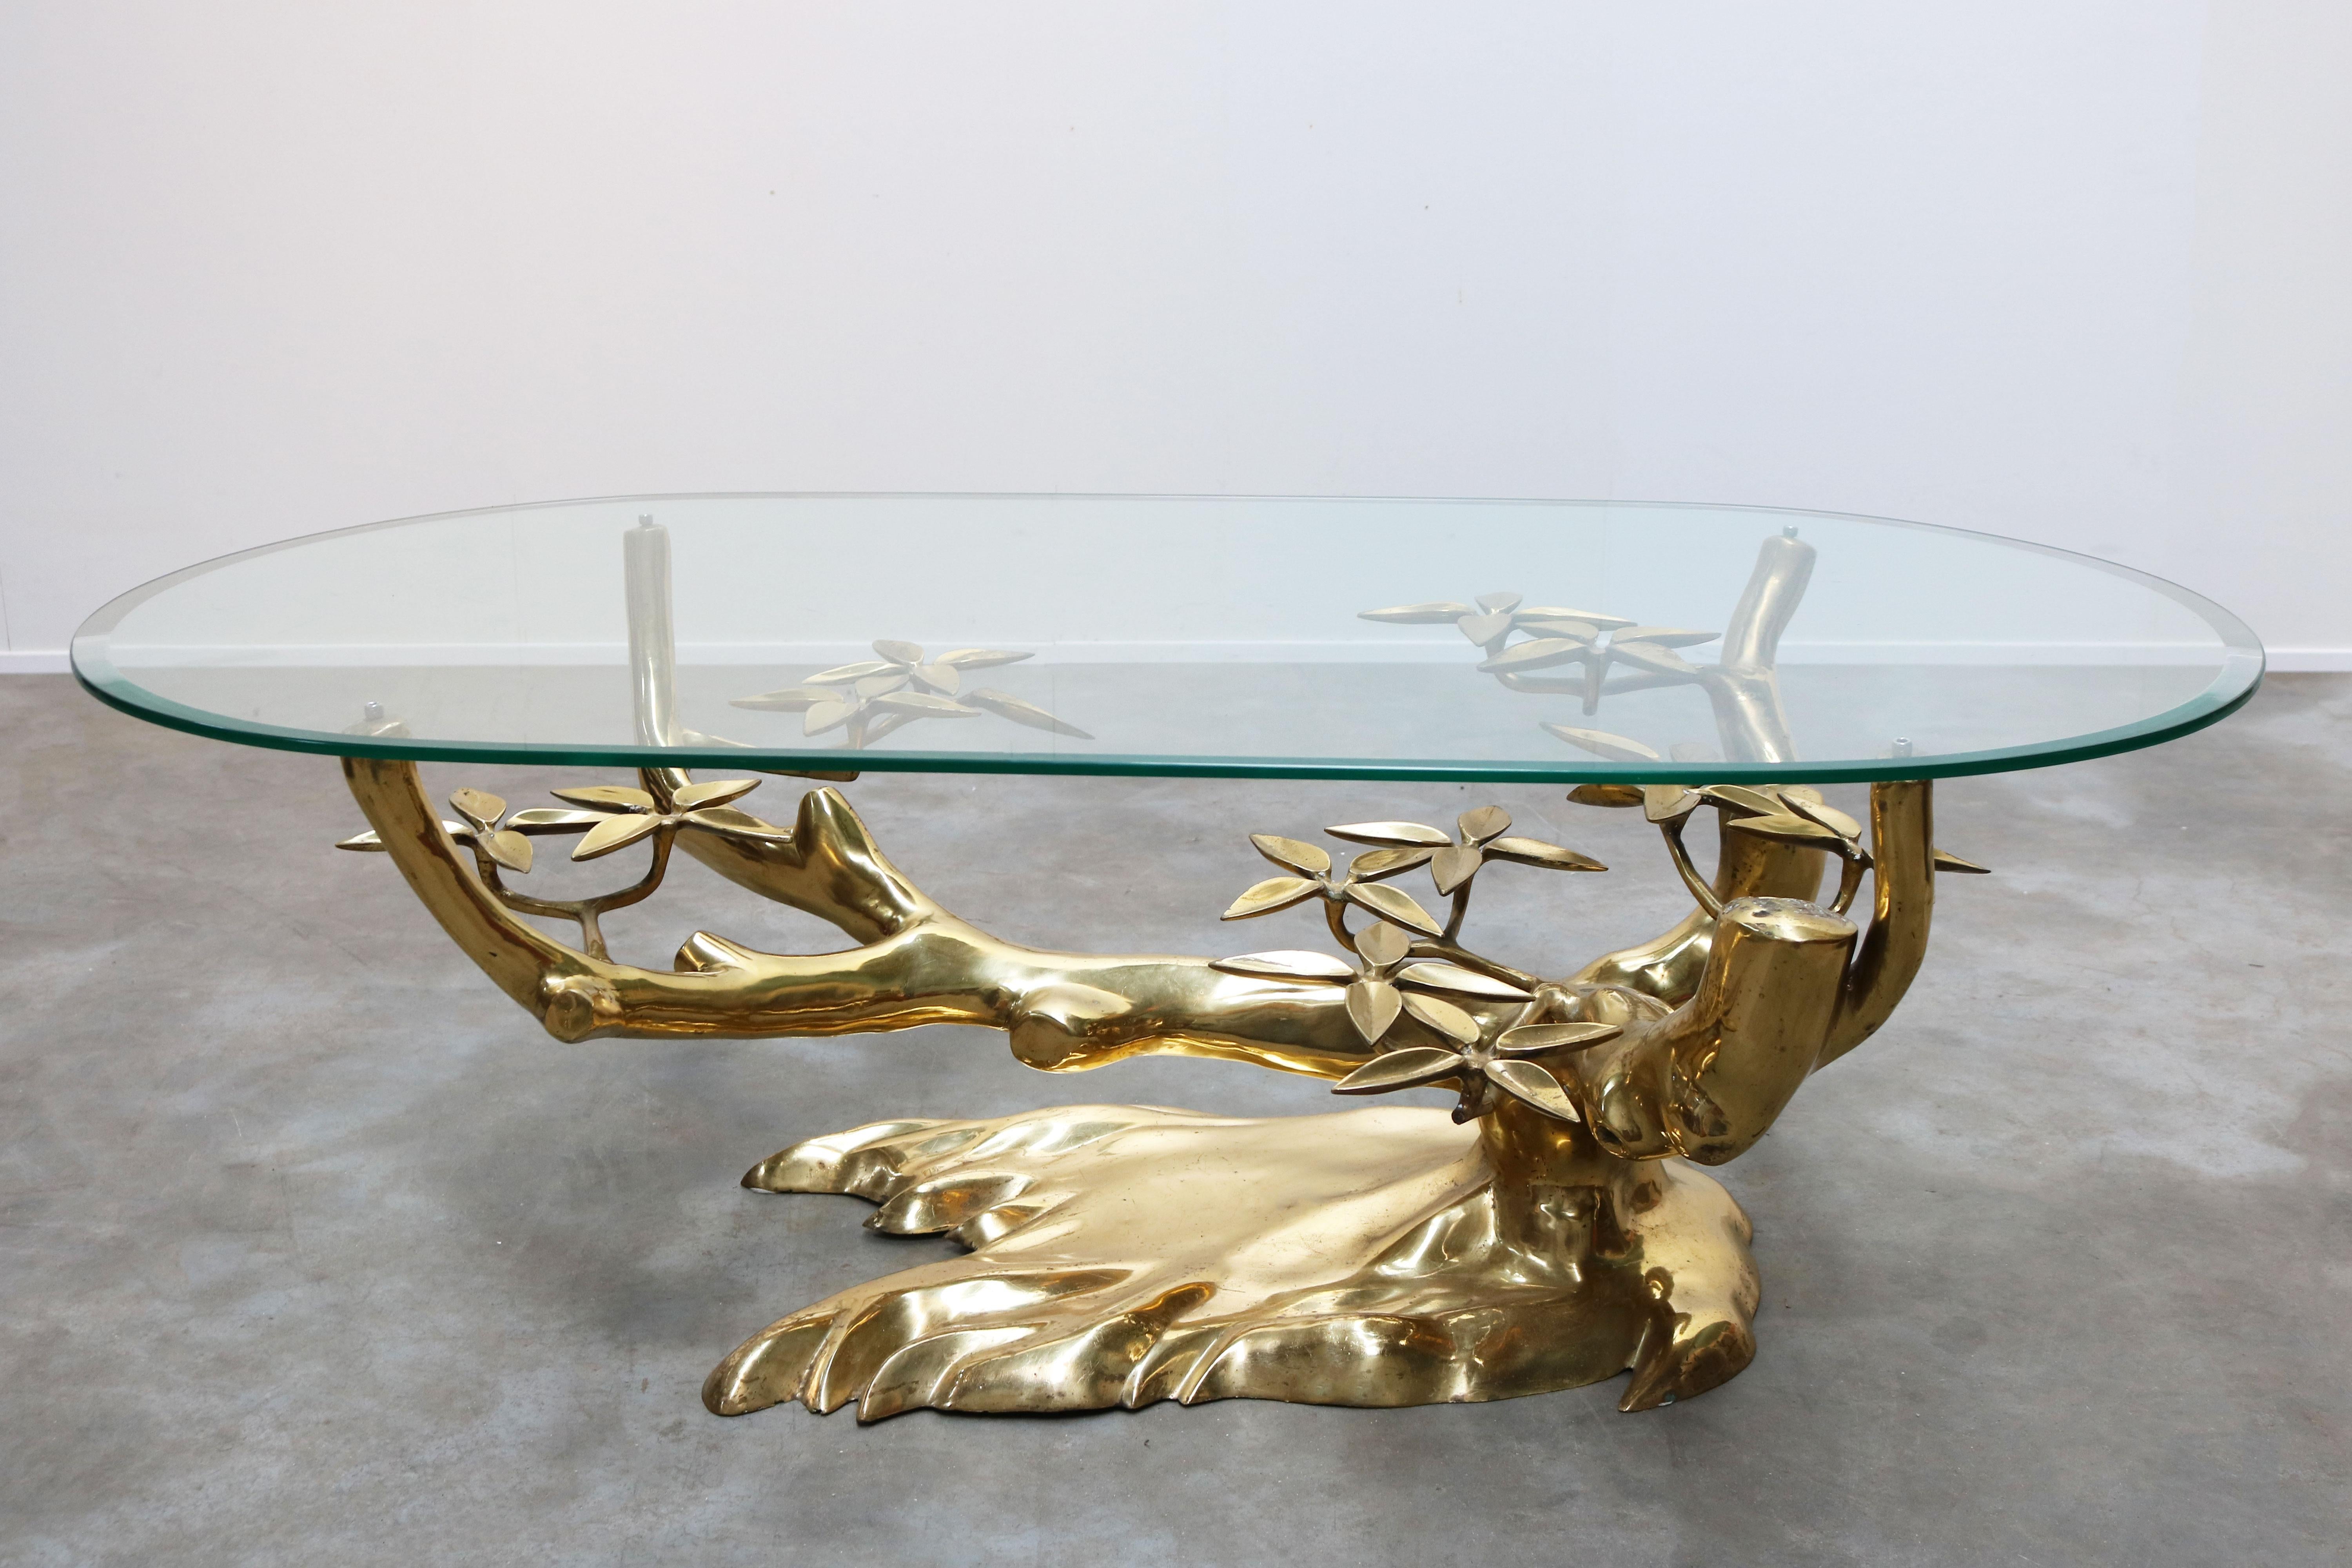 Belgian Rare ''Bonsai'' Coffee Table in Brass by Willy Daro 1970s Belgium, Glass, Gold